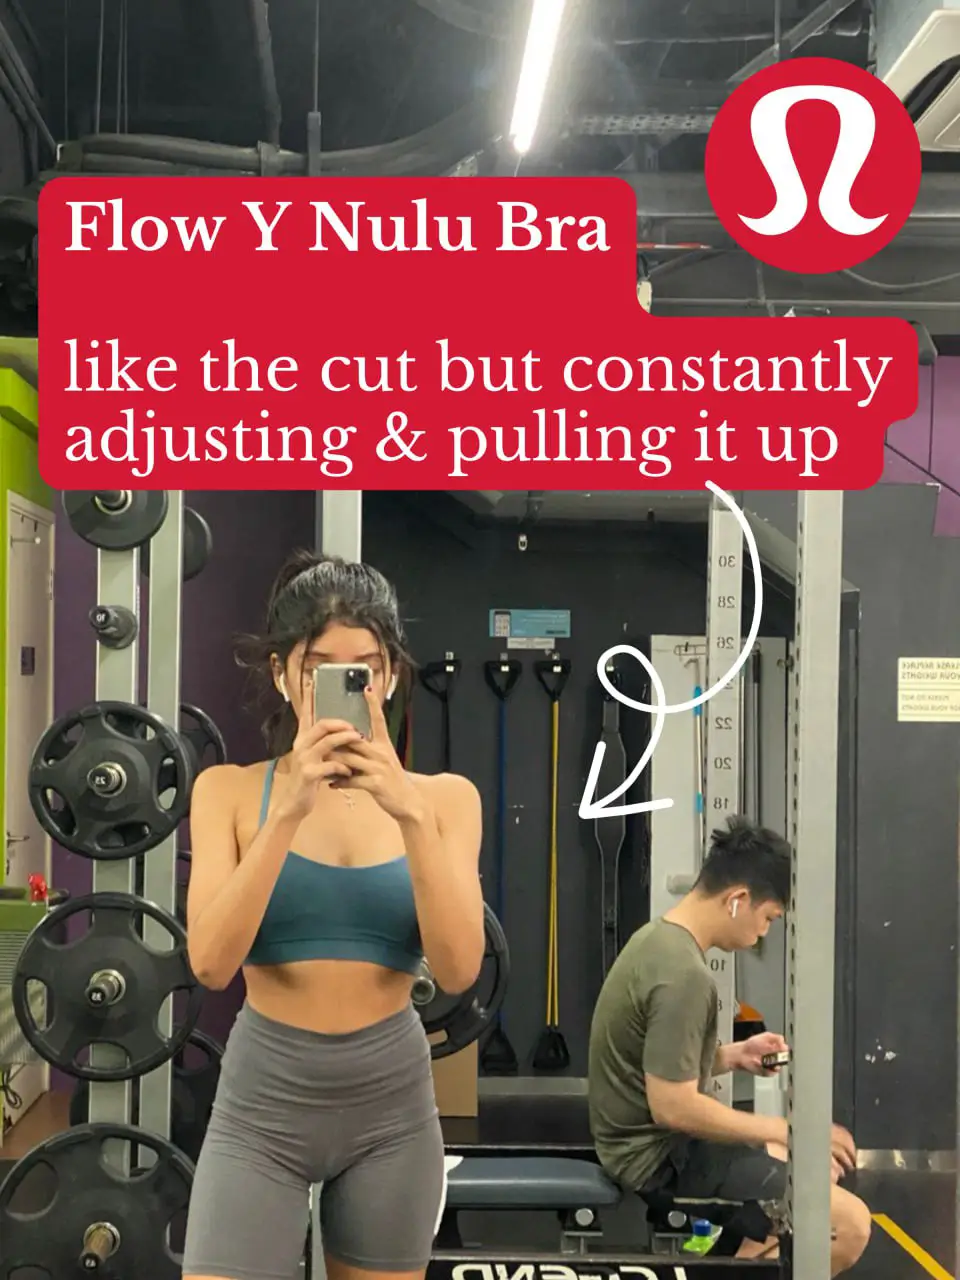 be effortlessly sexy + nip slip SAFE at the gym 🫣